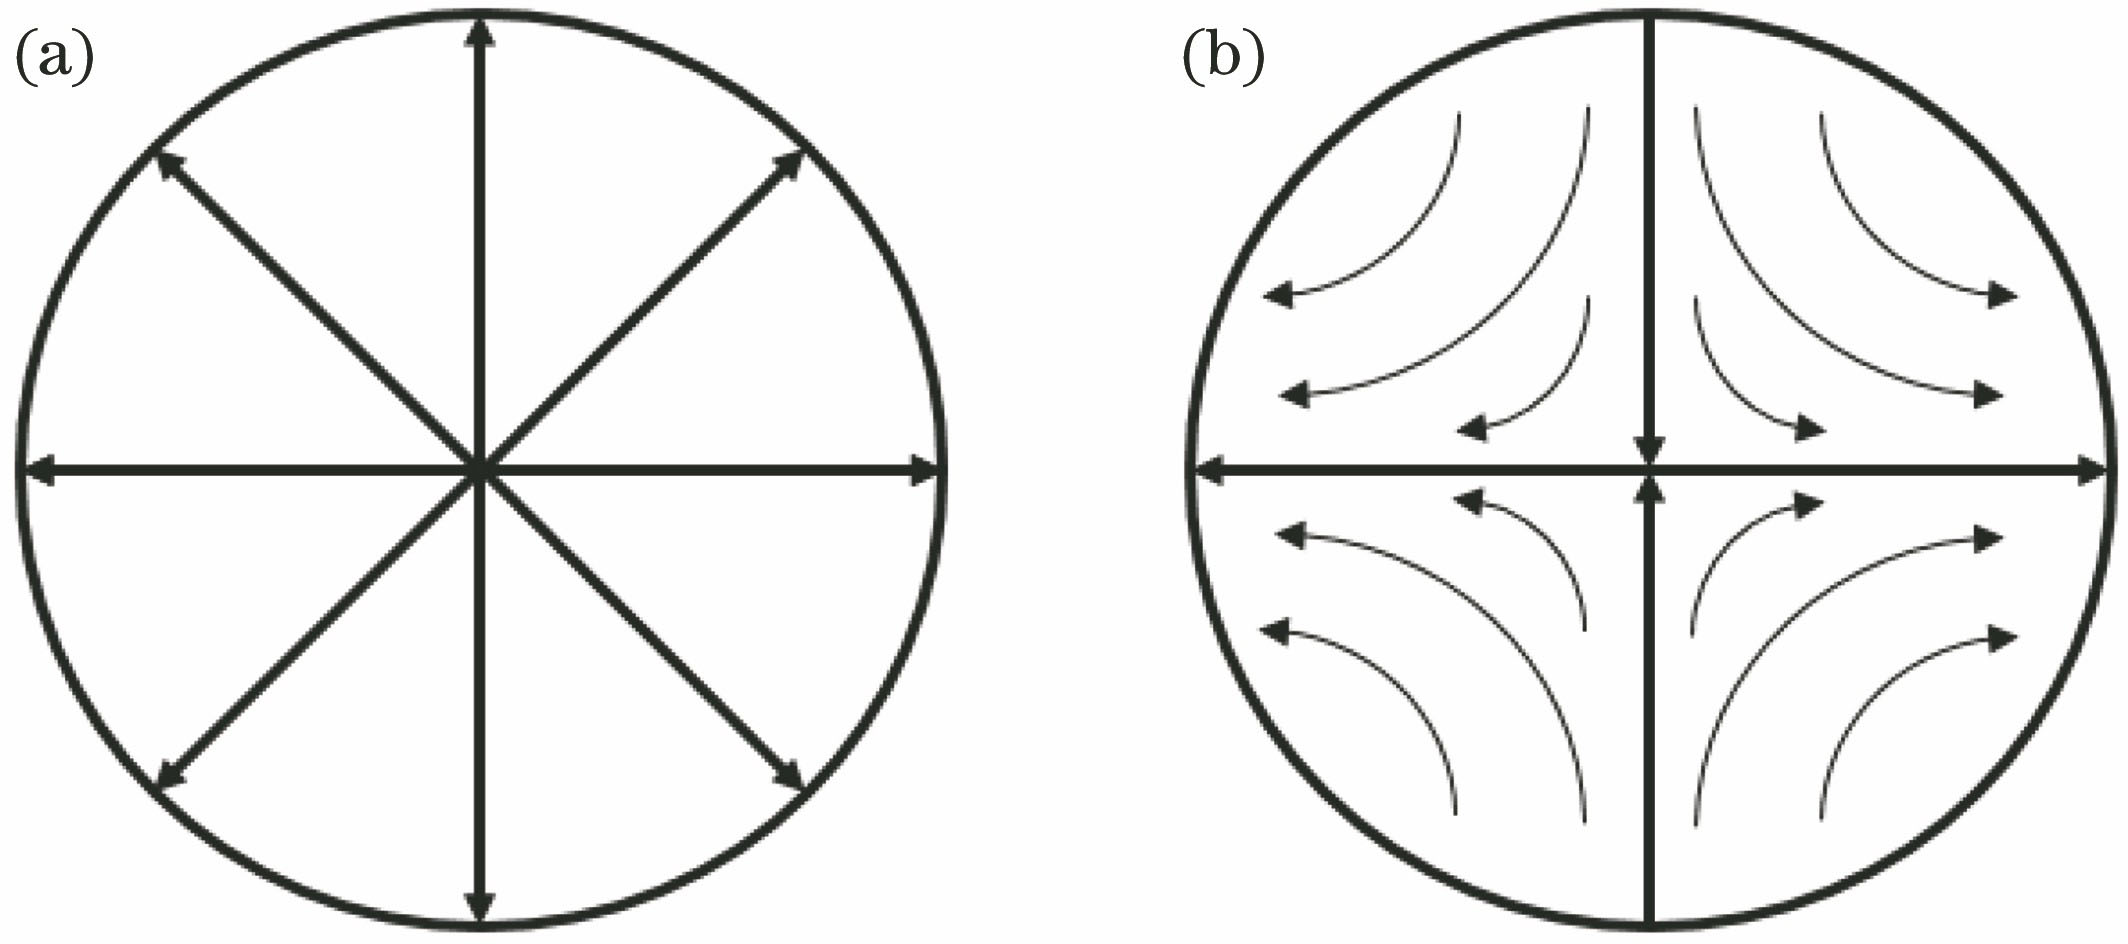 Vibration modes of guided acoustic-wave Brillouin scattering. (a) Radial acoustic mode R0m; (b) torsional-radial acoustic mode TR2m